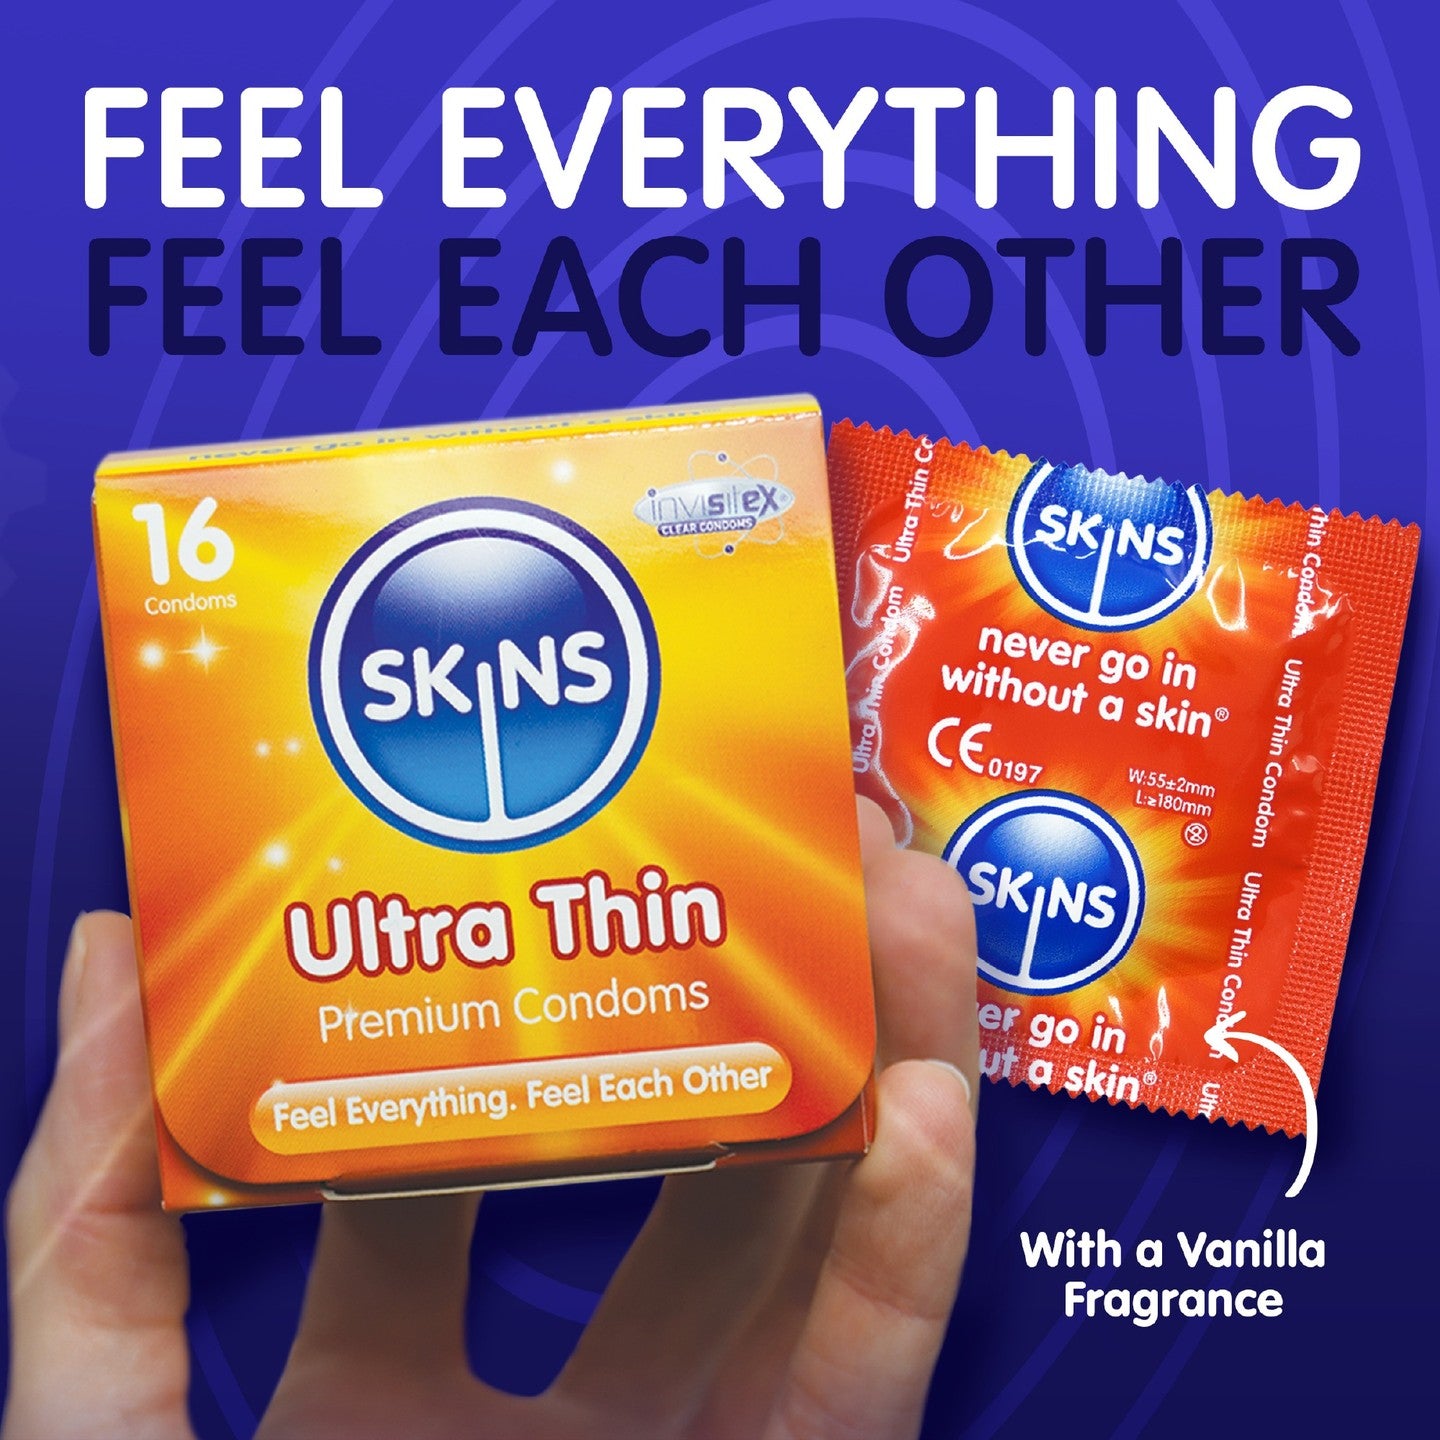 Skins Ultra Thin Condoms - 16 Pack - Extreme Toyz Singapore - https://extremetoyz.com.sg - Sex Toys and Lingerie Online Store